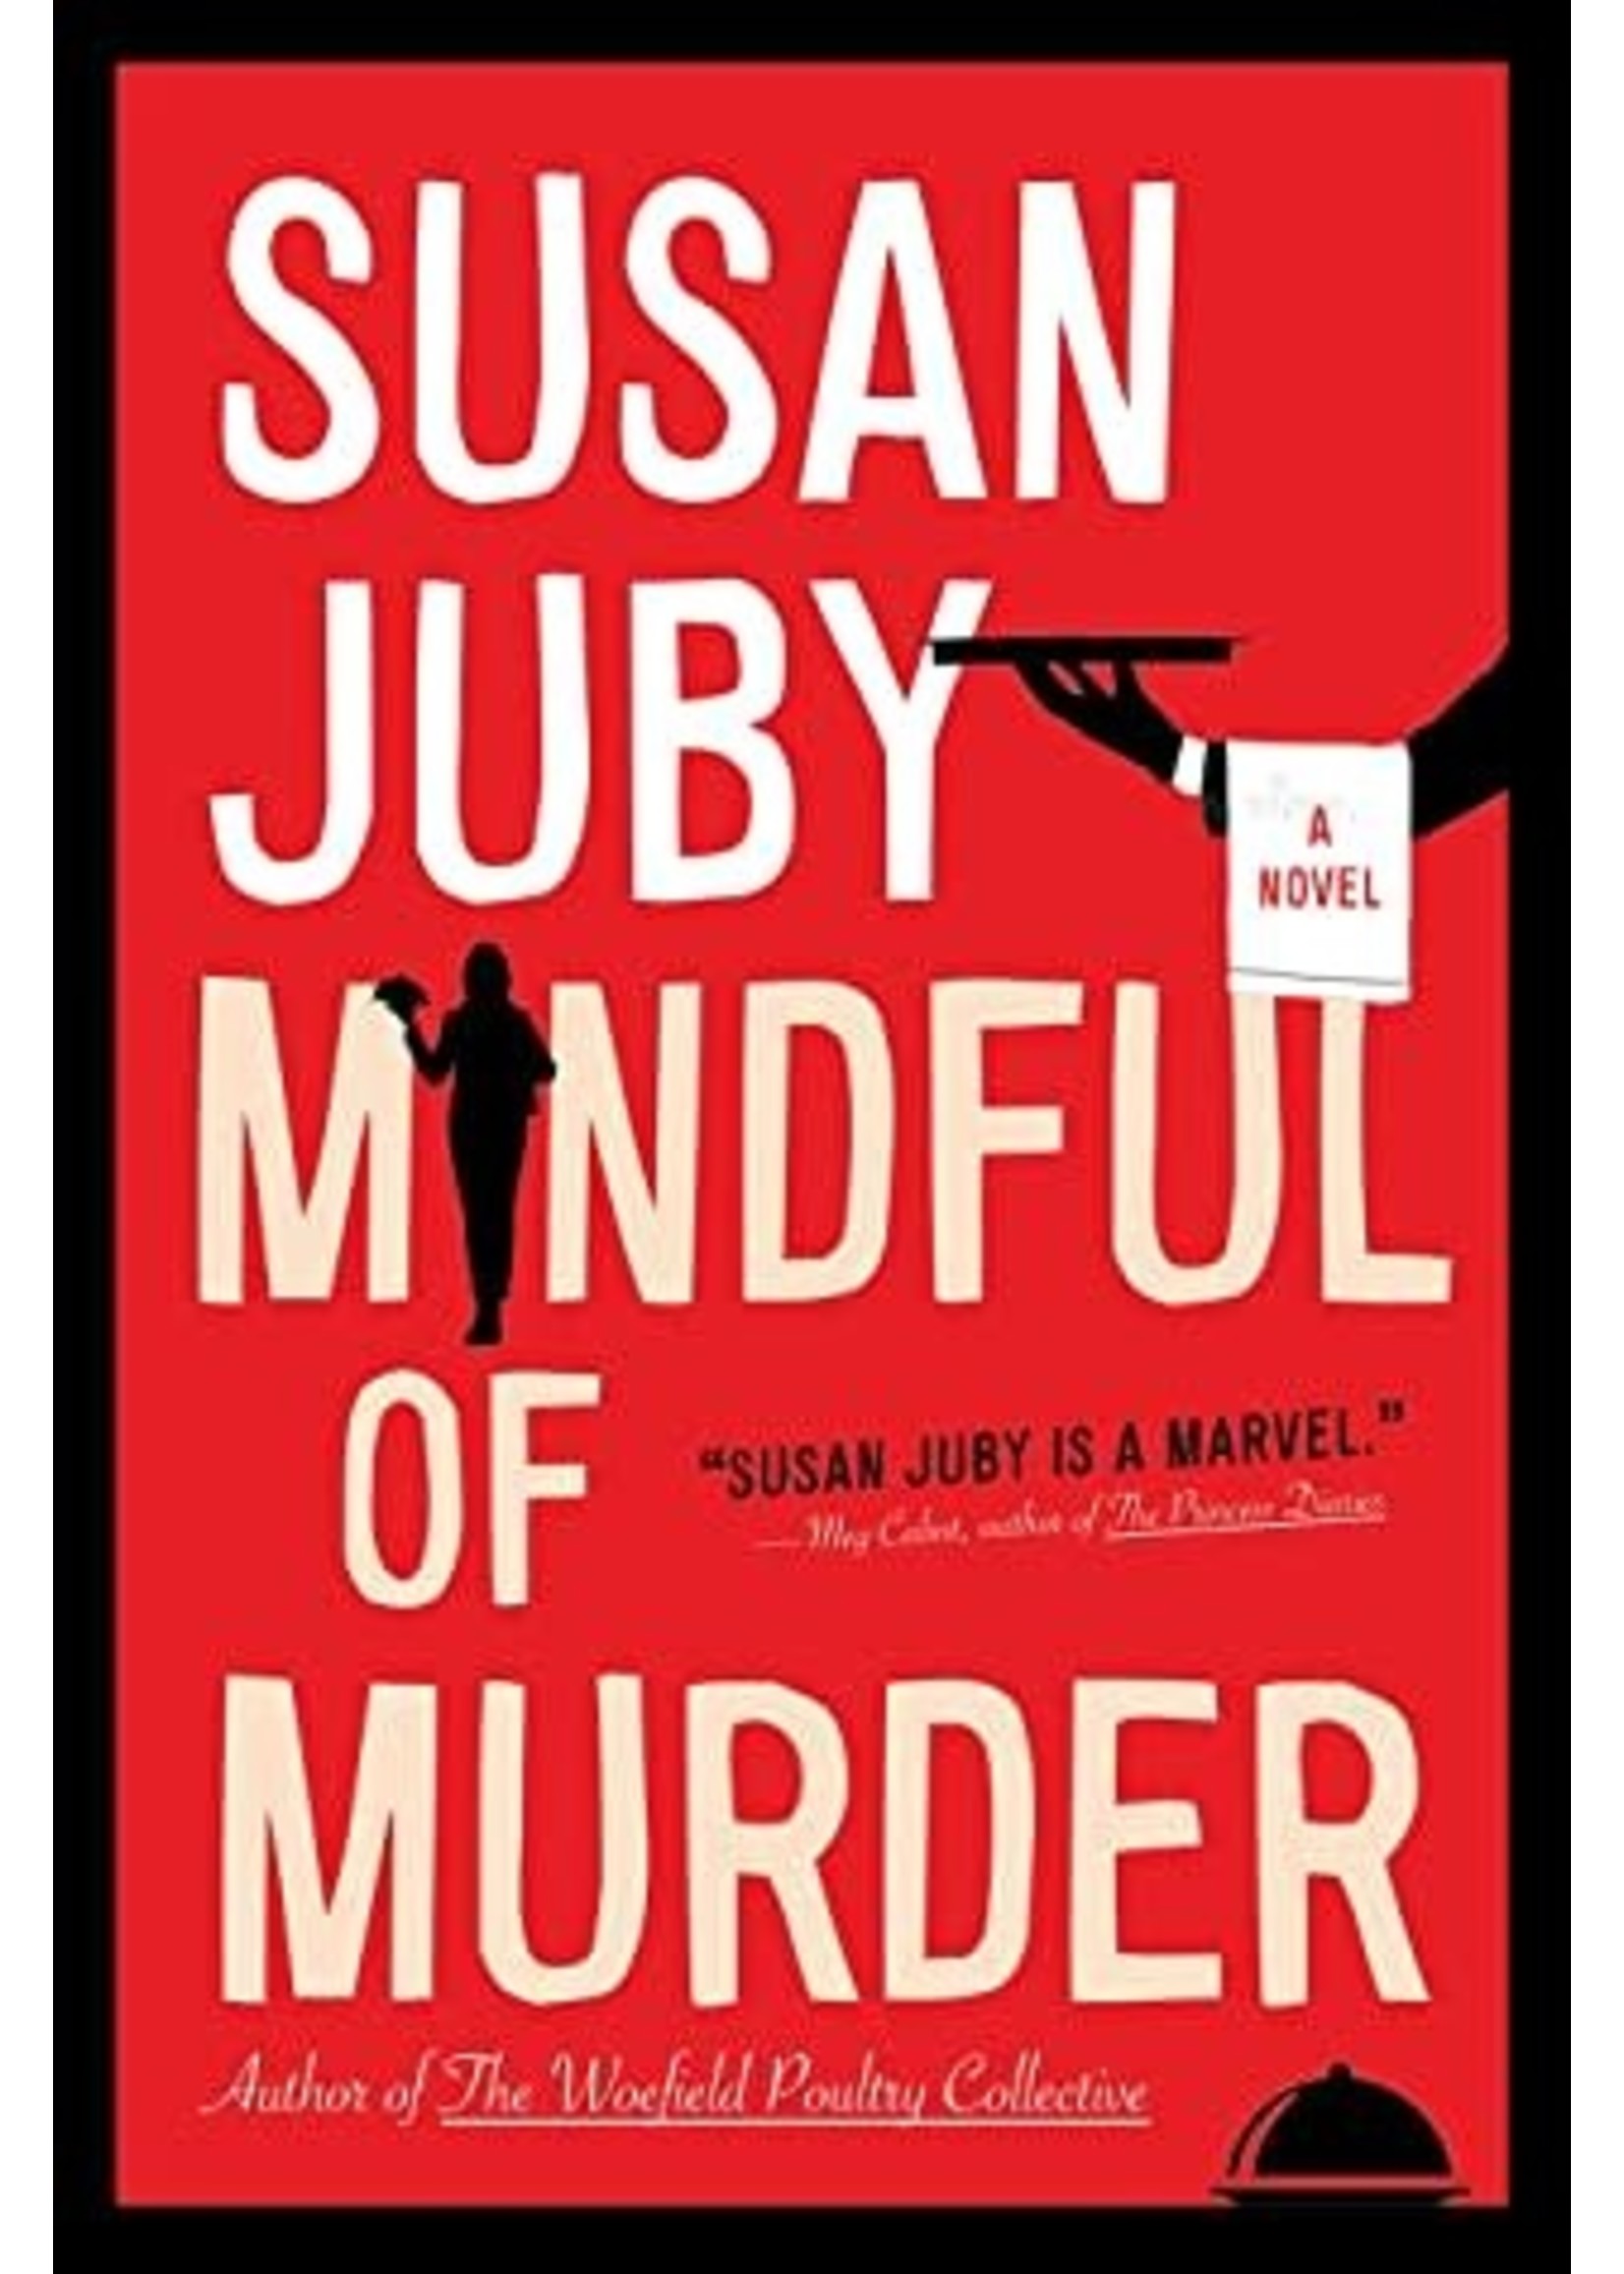 Mindful of Murder by Susan Juby